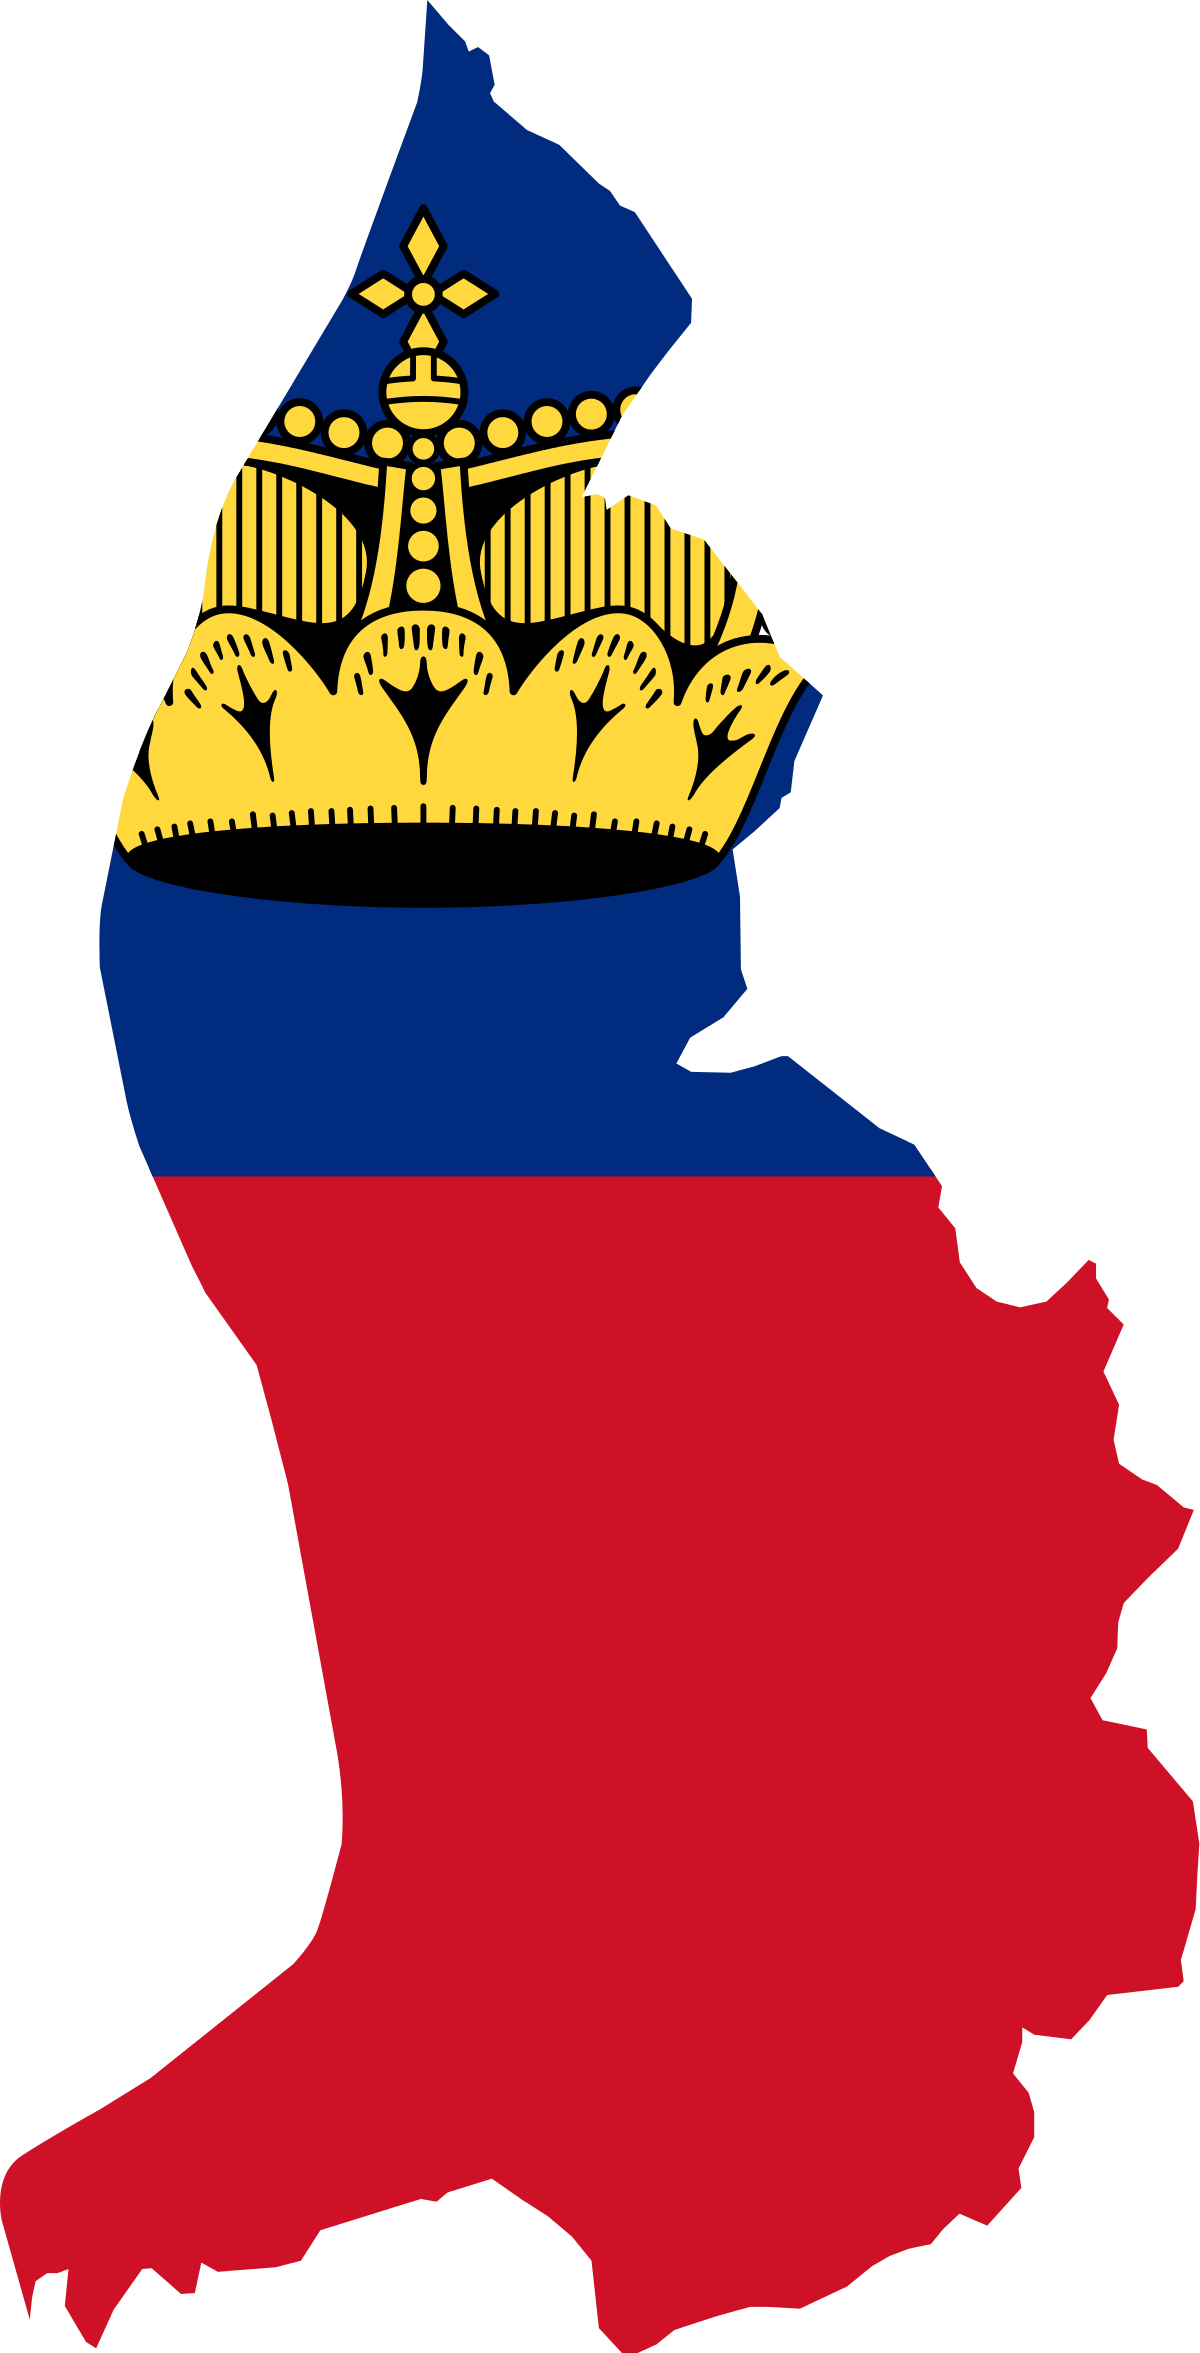 A Flag With A Crown On It